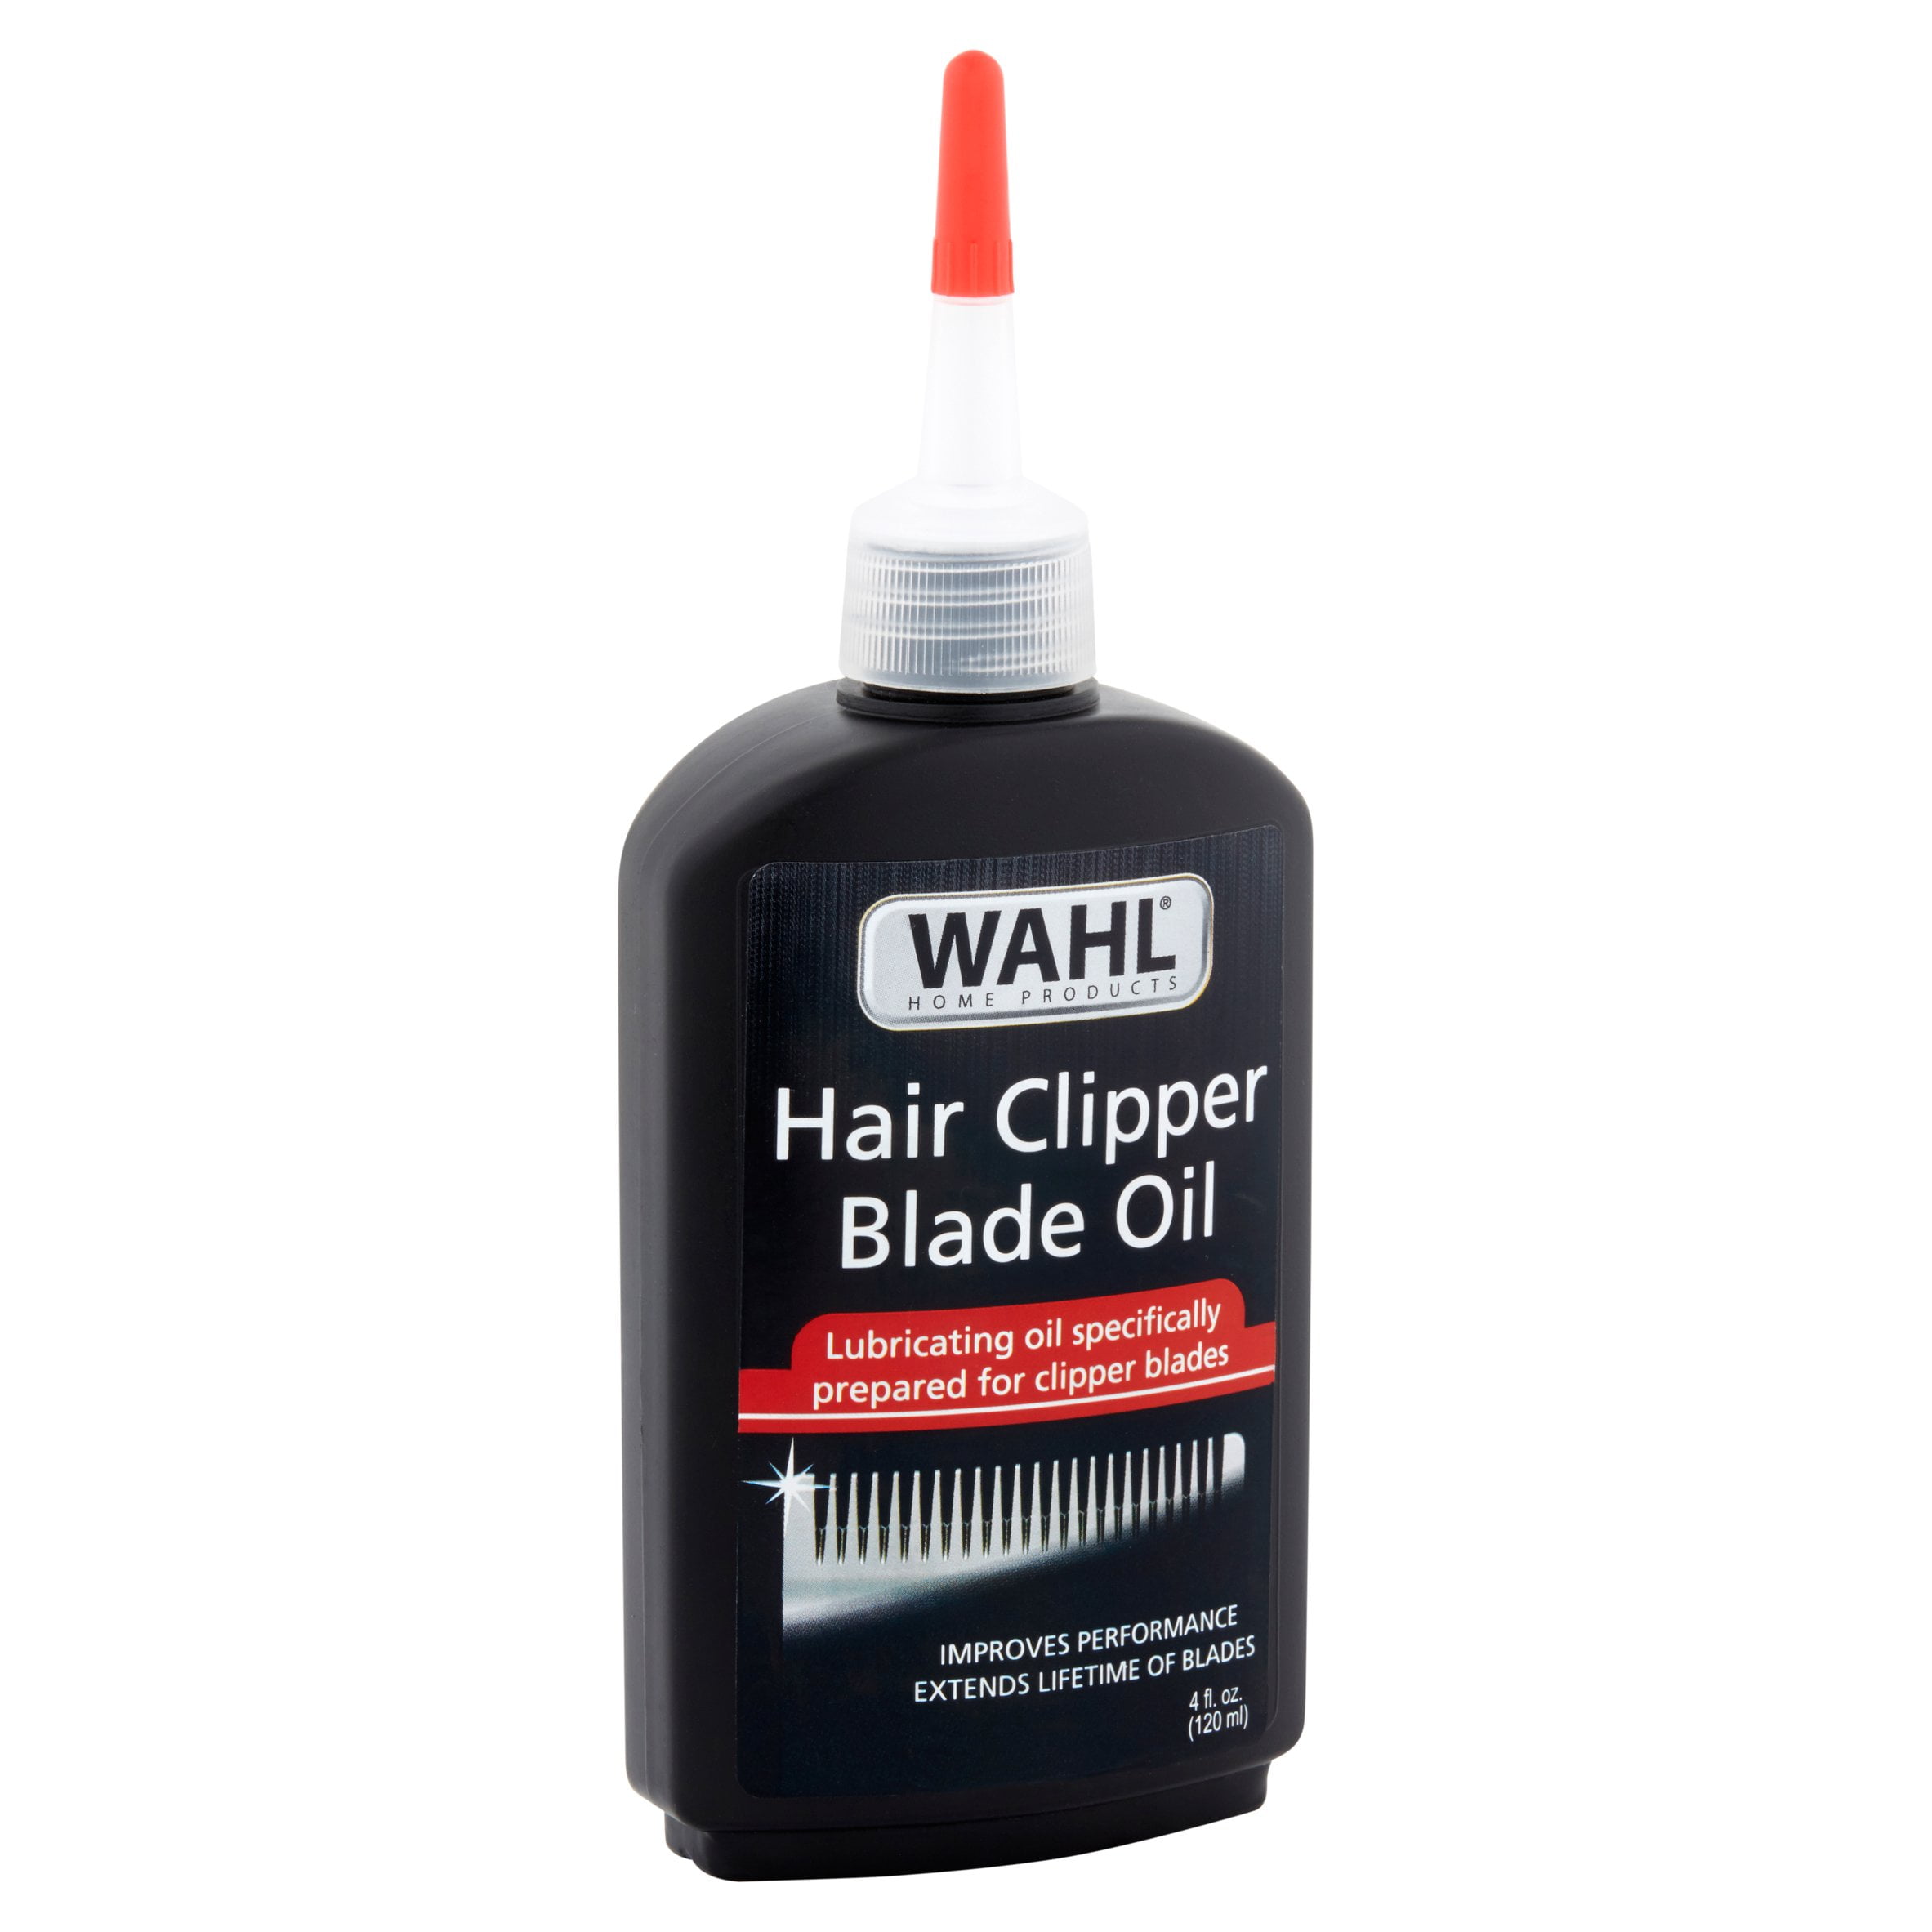 Wahl Premium Hair Clipper Blade Lubricating Oil for Clippers, 4 Fluid  Ounces – 3310-300